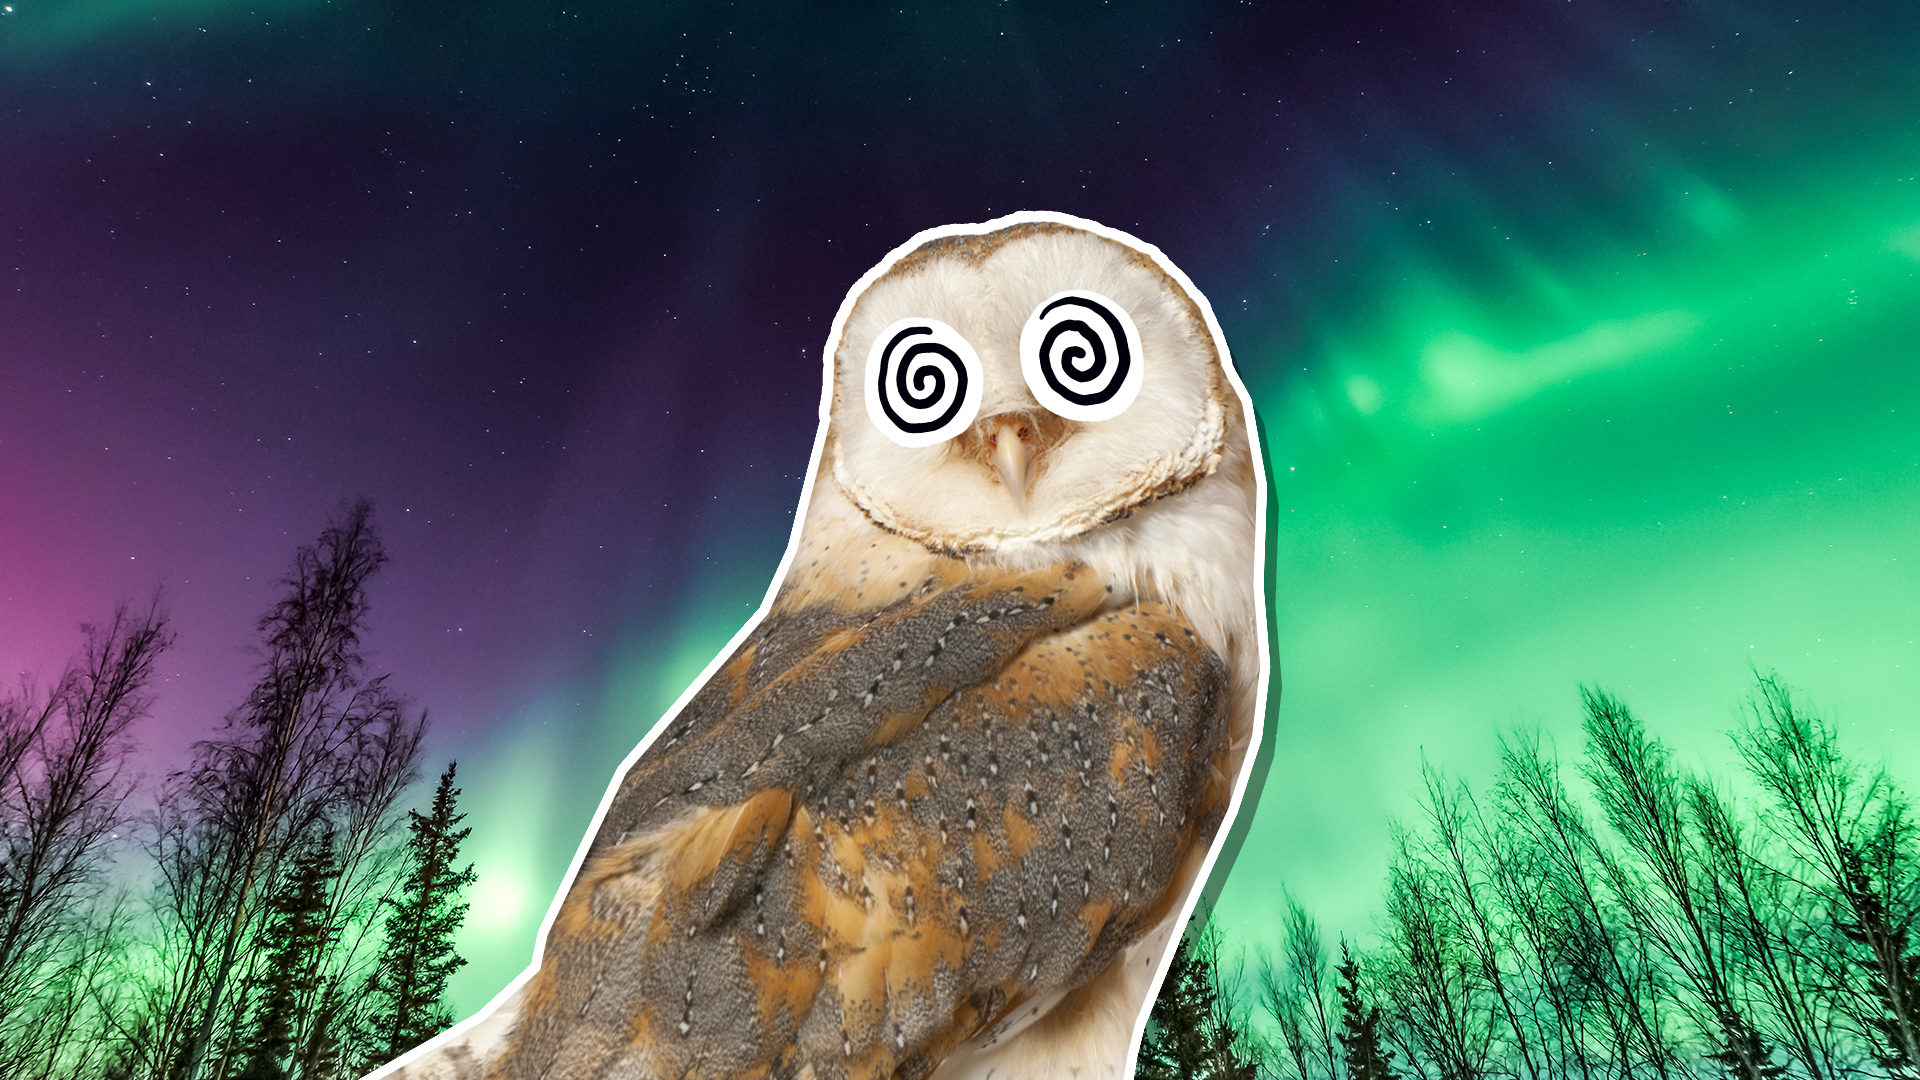 An owl underneath the Northern Lights